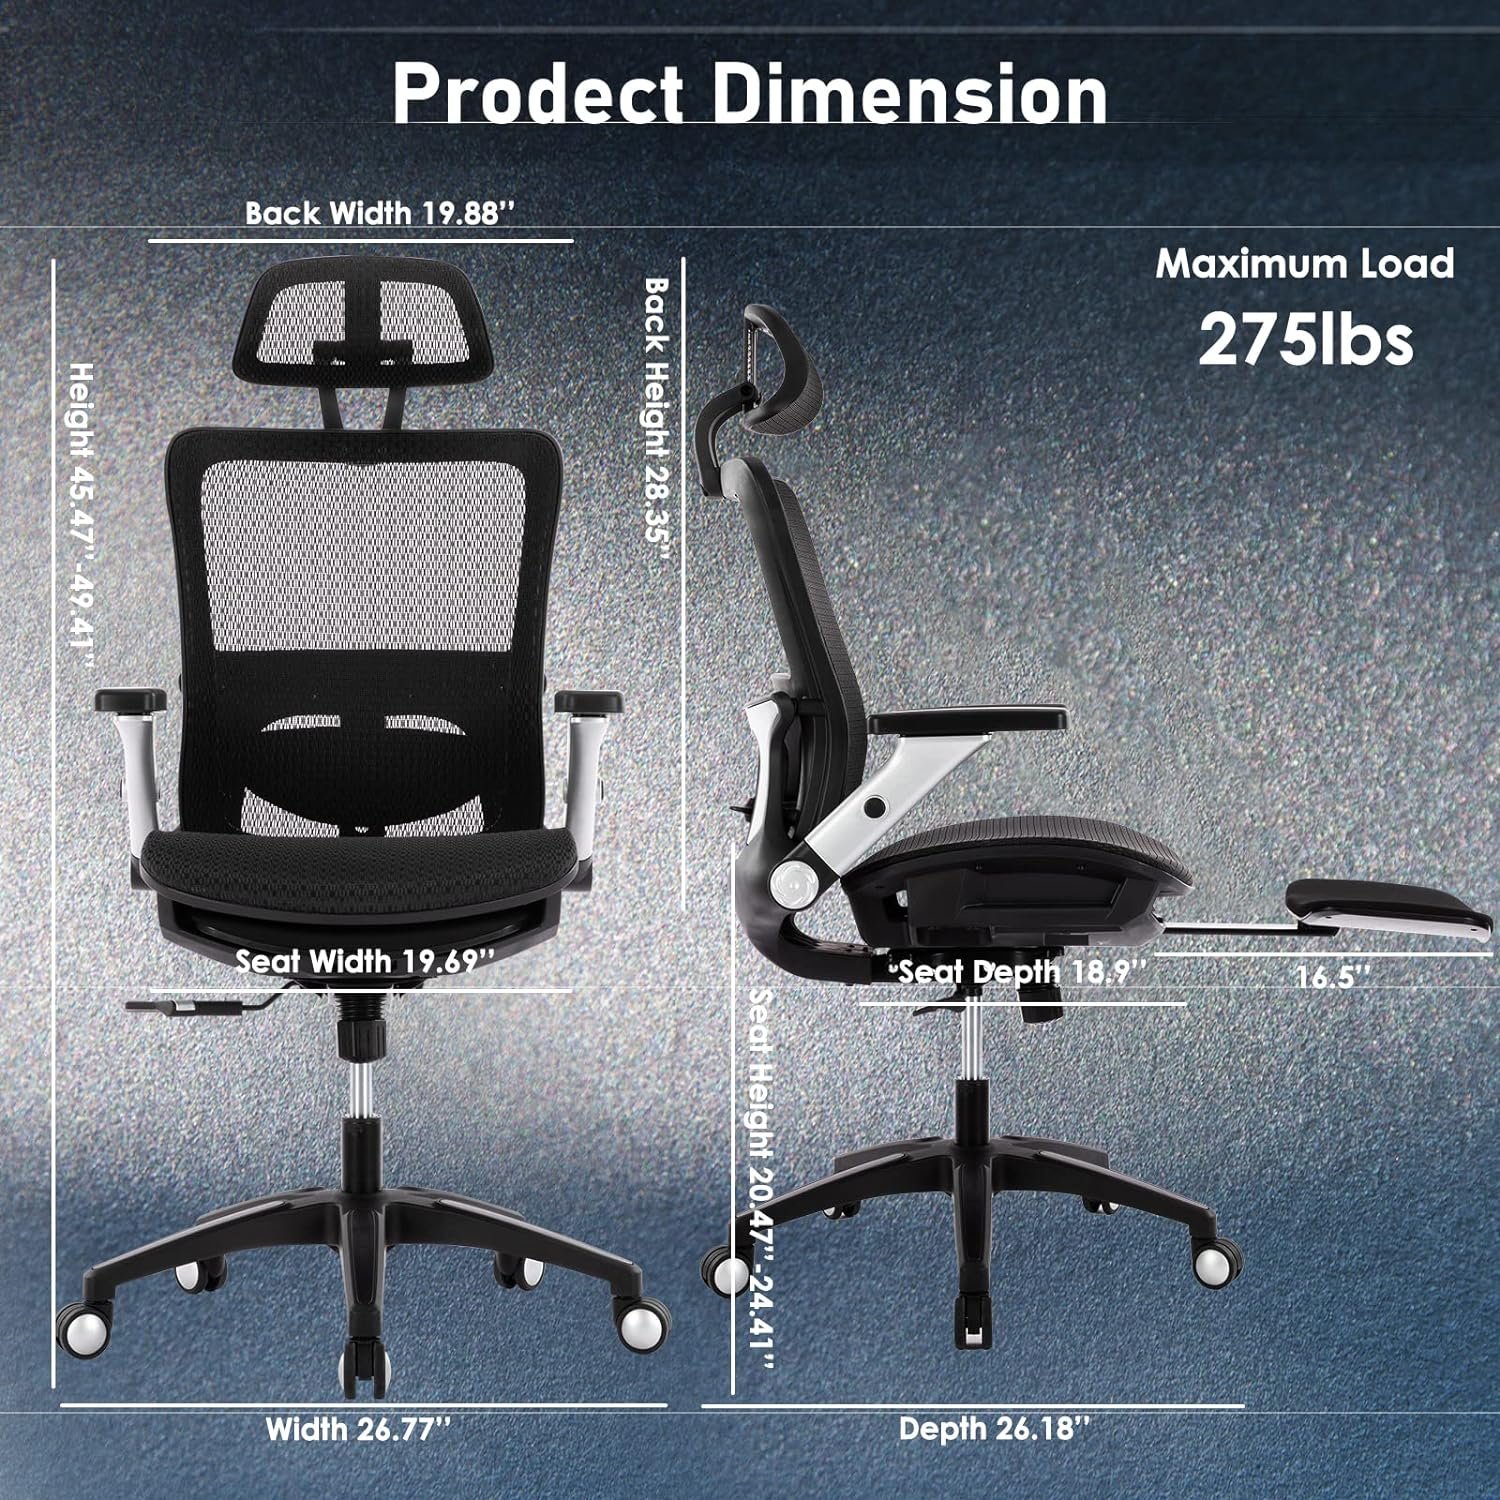 Ergonomic Mesh Office Chair with Footrest, High Back Computer Executive Desk Chair with Headrest and 4D Flip-up Armrests, Adjustable Tilt Lock and Lumbar Support-Black